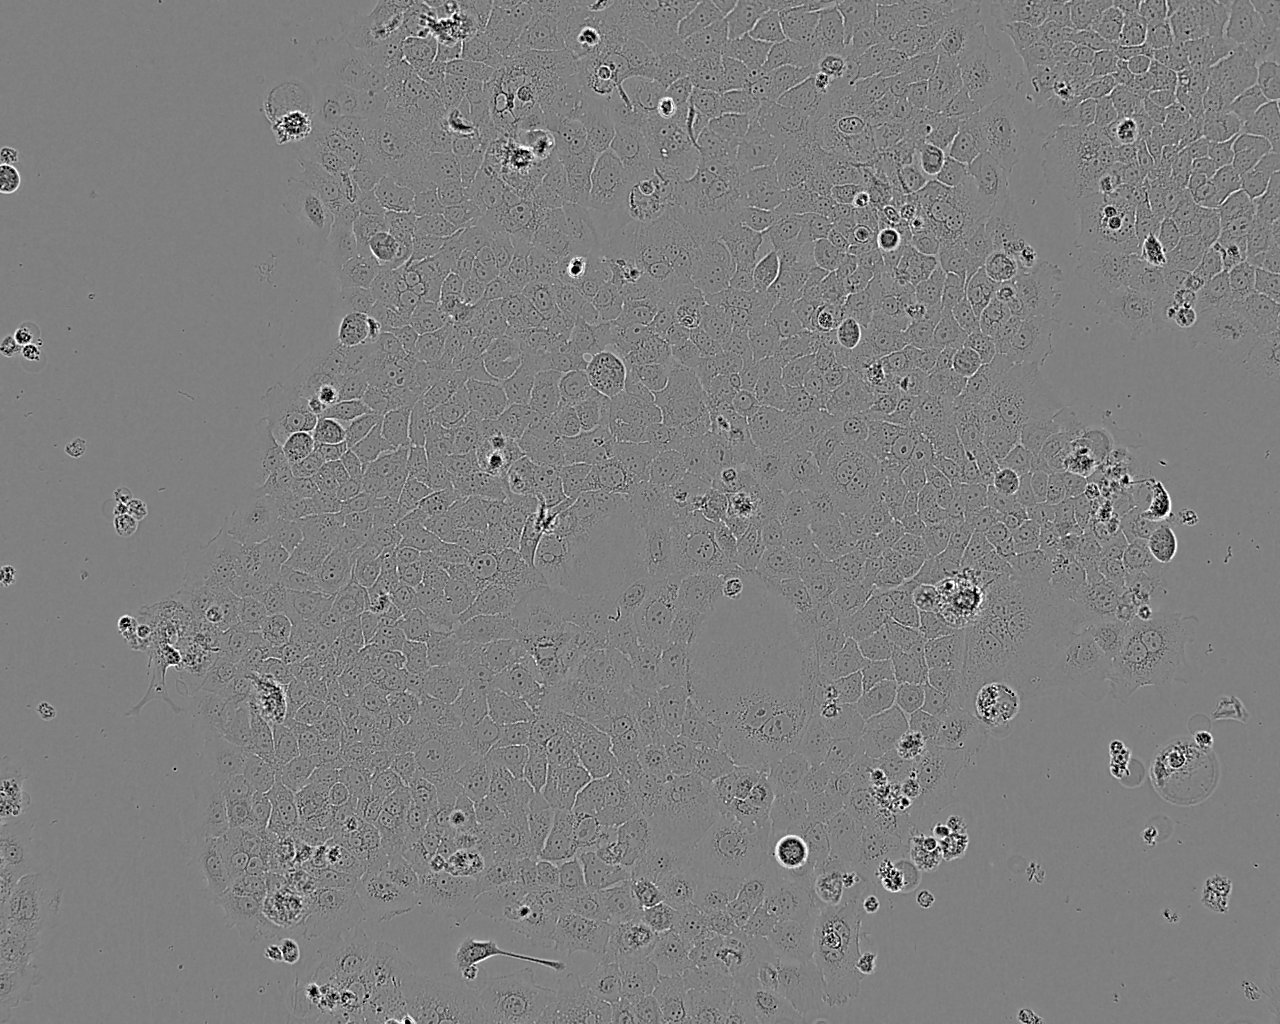 HeLa S3 Epithelial Cell|人宫颈癌传代细胞(有STR鉴定),HeLa S3 Epithelial Cell